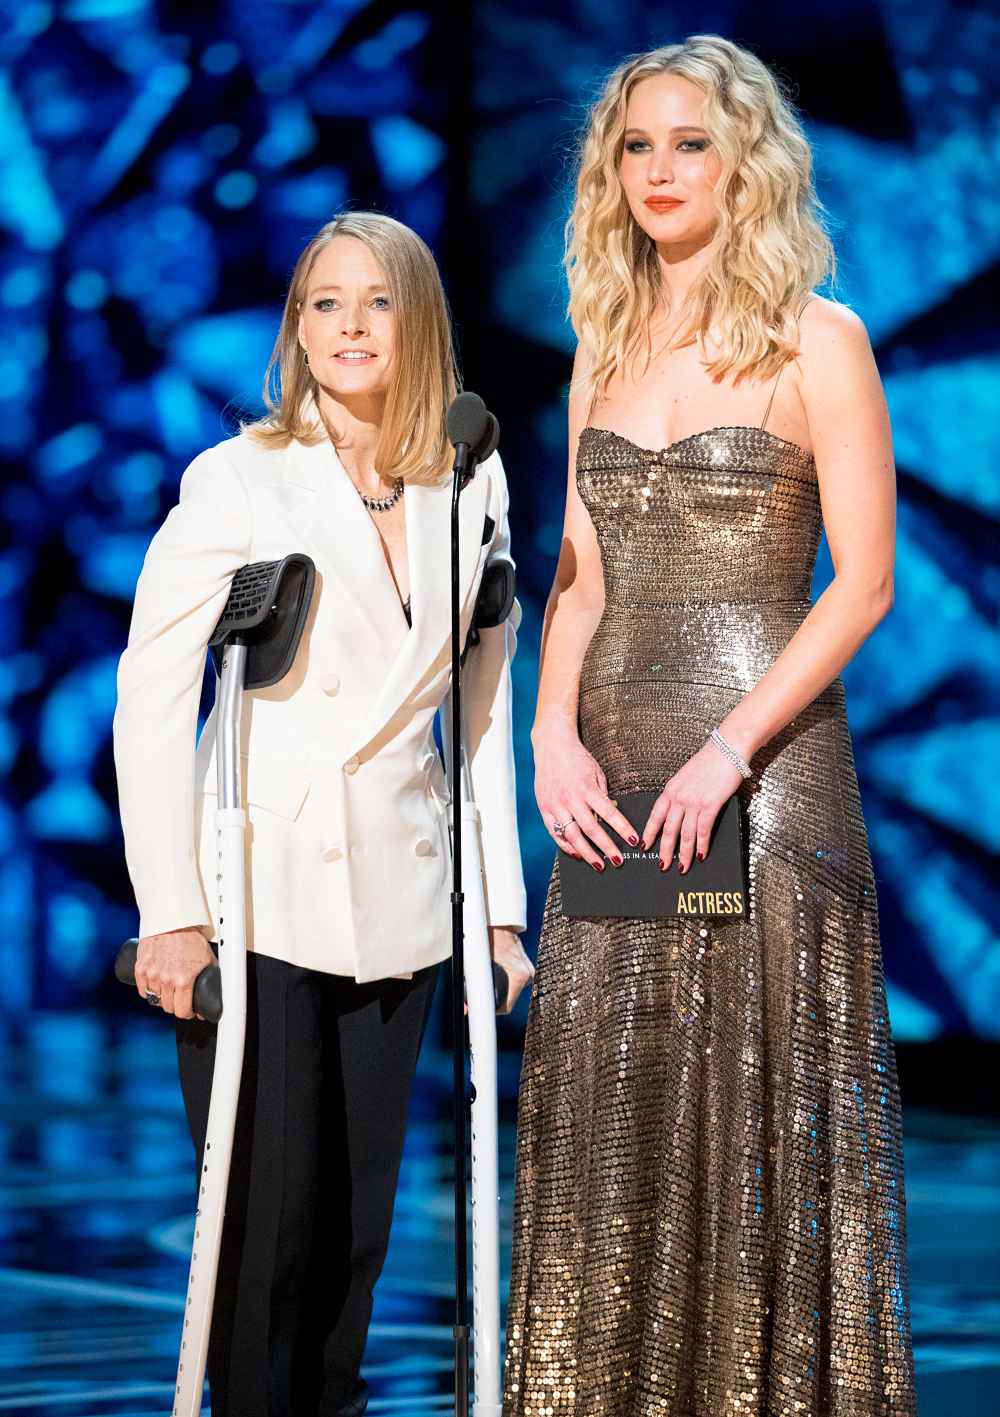 Jodie Foster and Jennifer Lawrence during the 90th Annual Academy Awards show on March 4, 2018 in Hollywood, California.